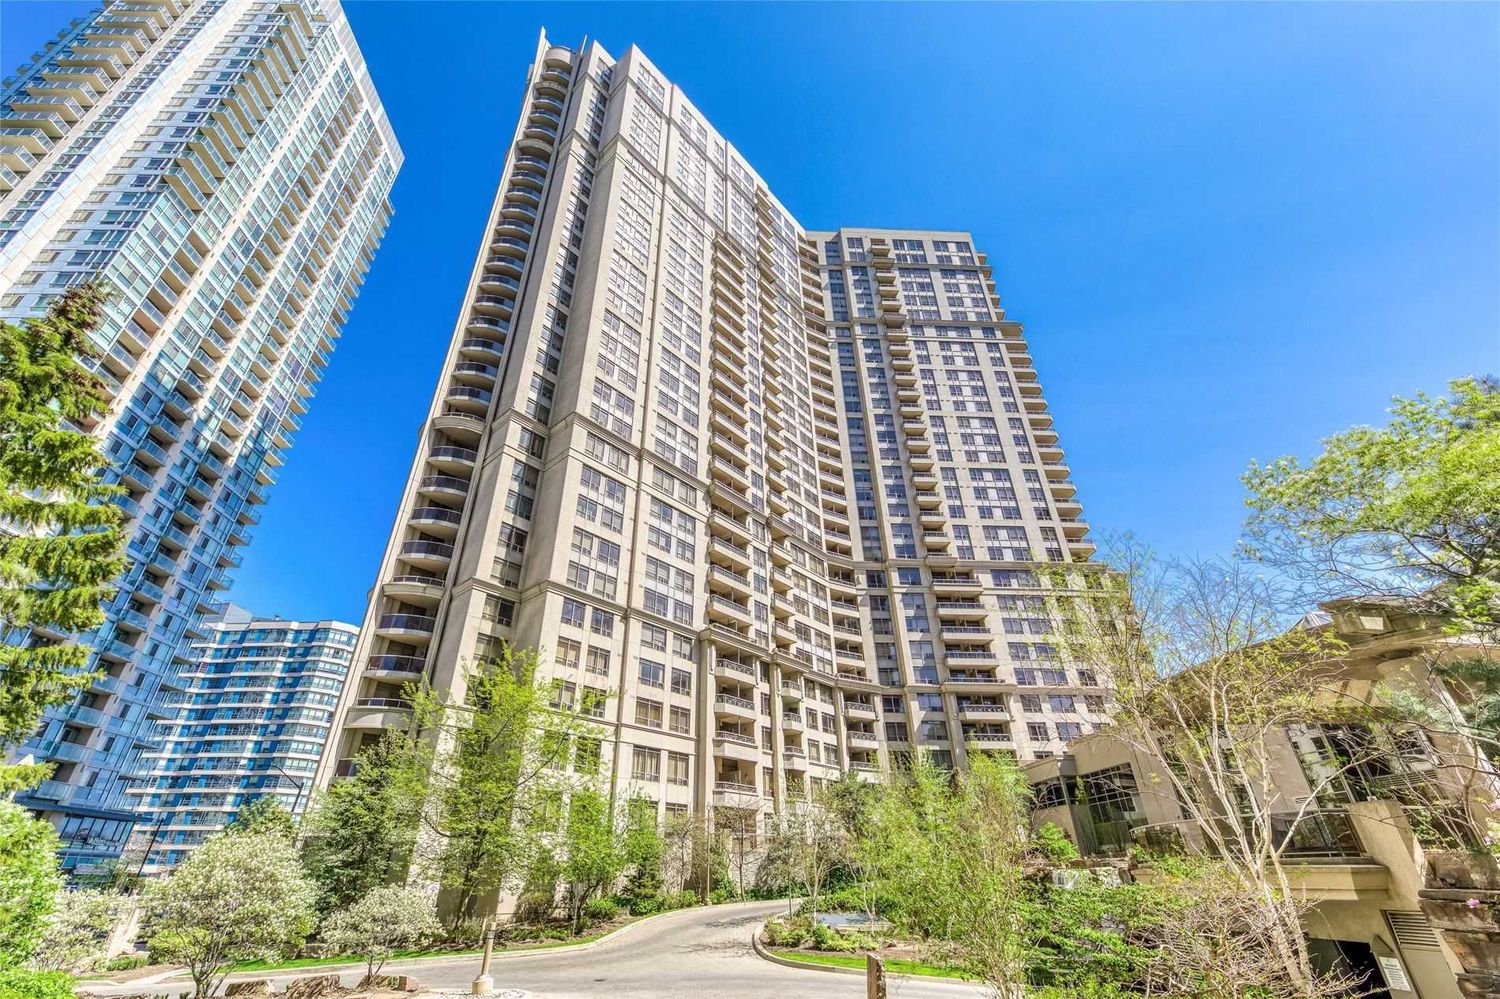 3880 Duke of York Boulevard. Ovation Condos is located in  Mississauga, Toronto - image #1 of 3